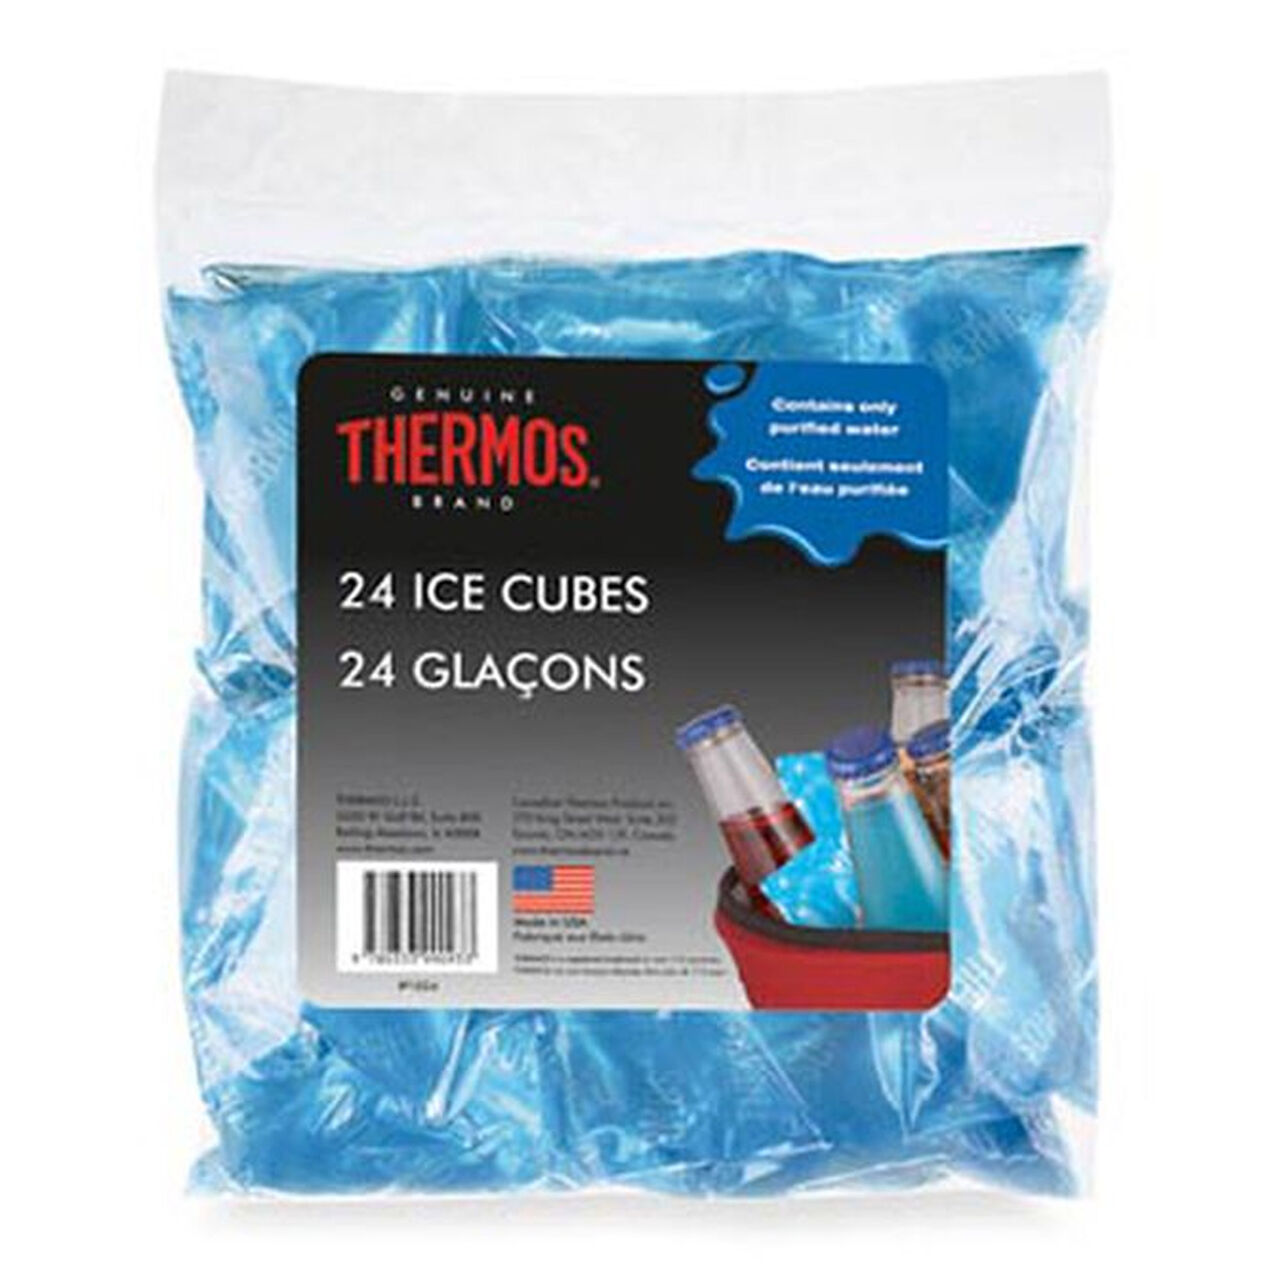 Thermos Reusable Ice Cubes (24ct.)